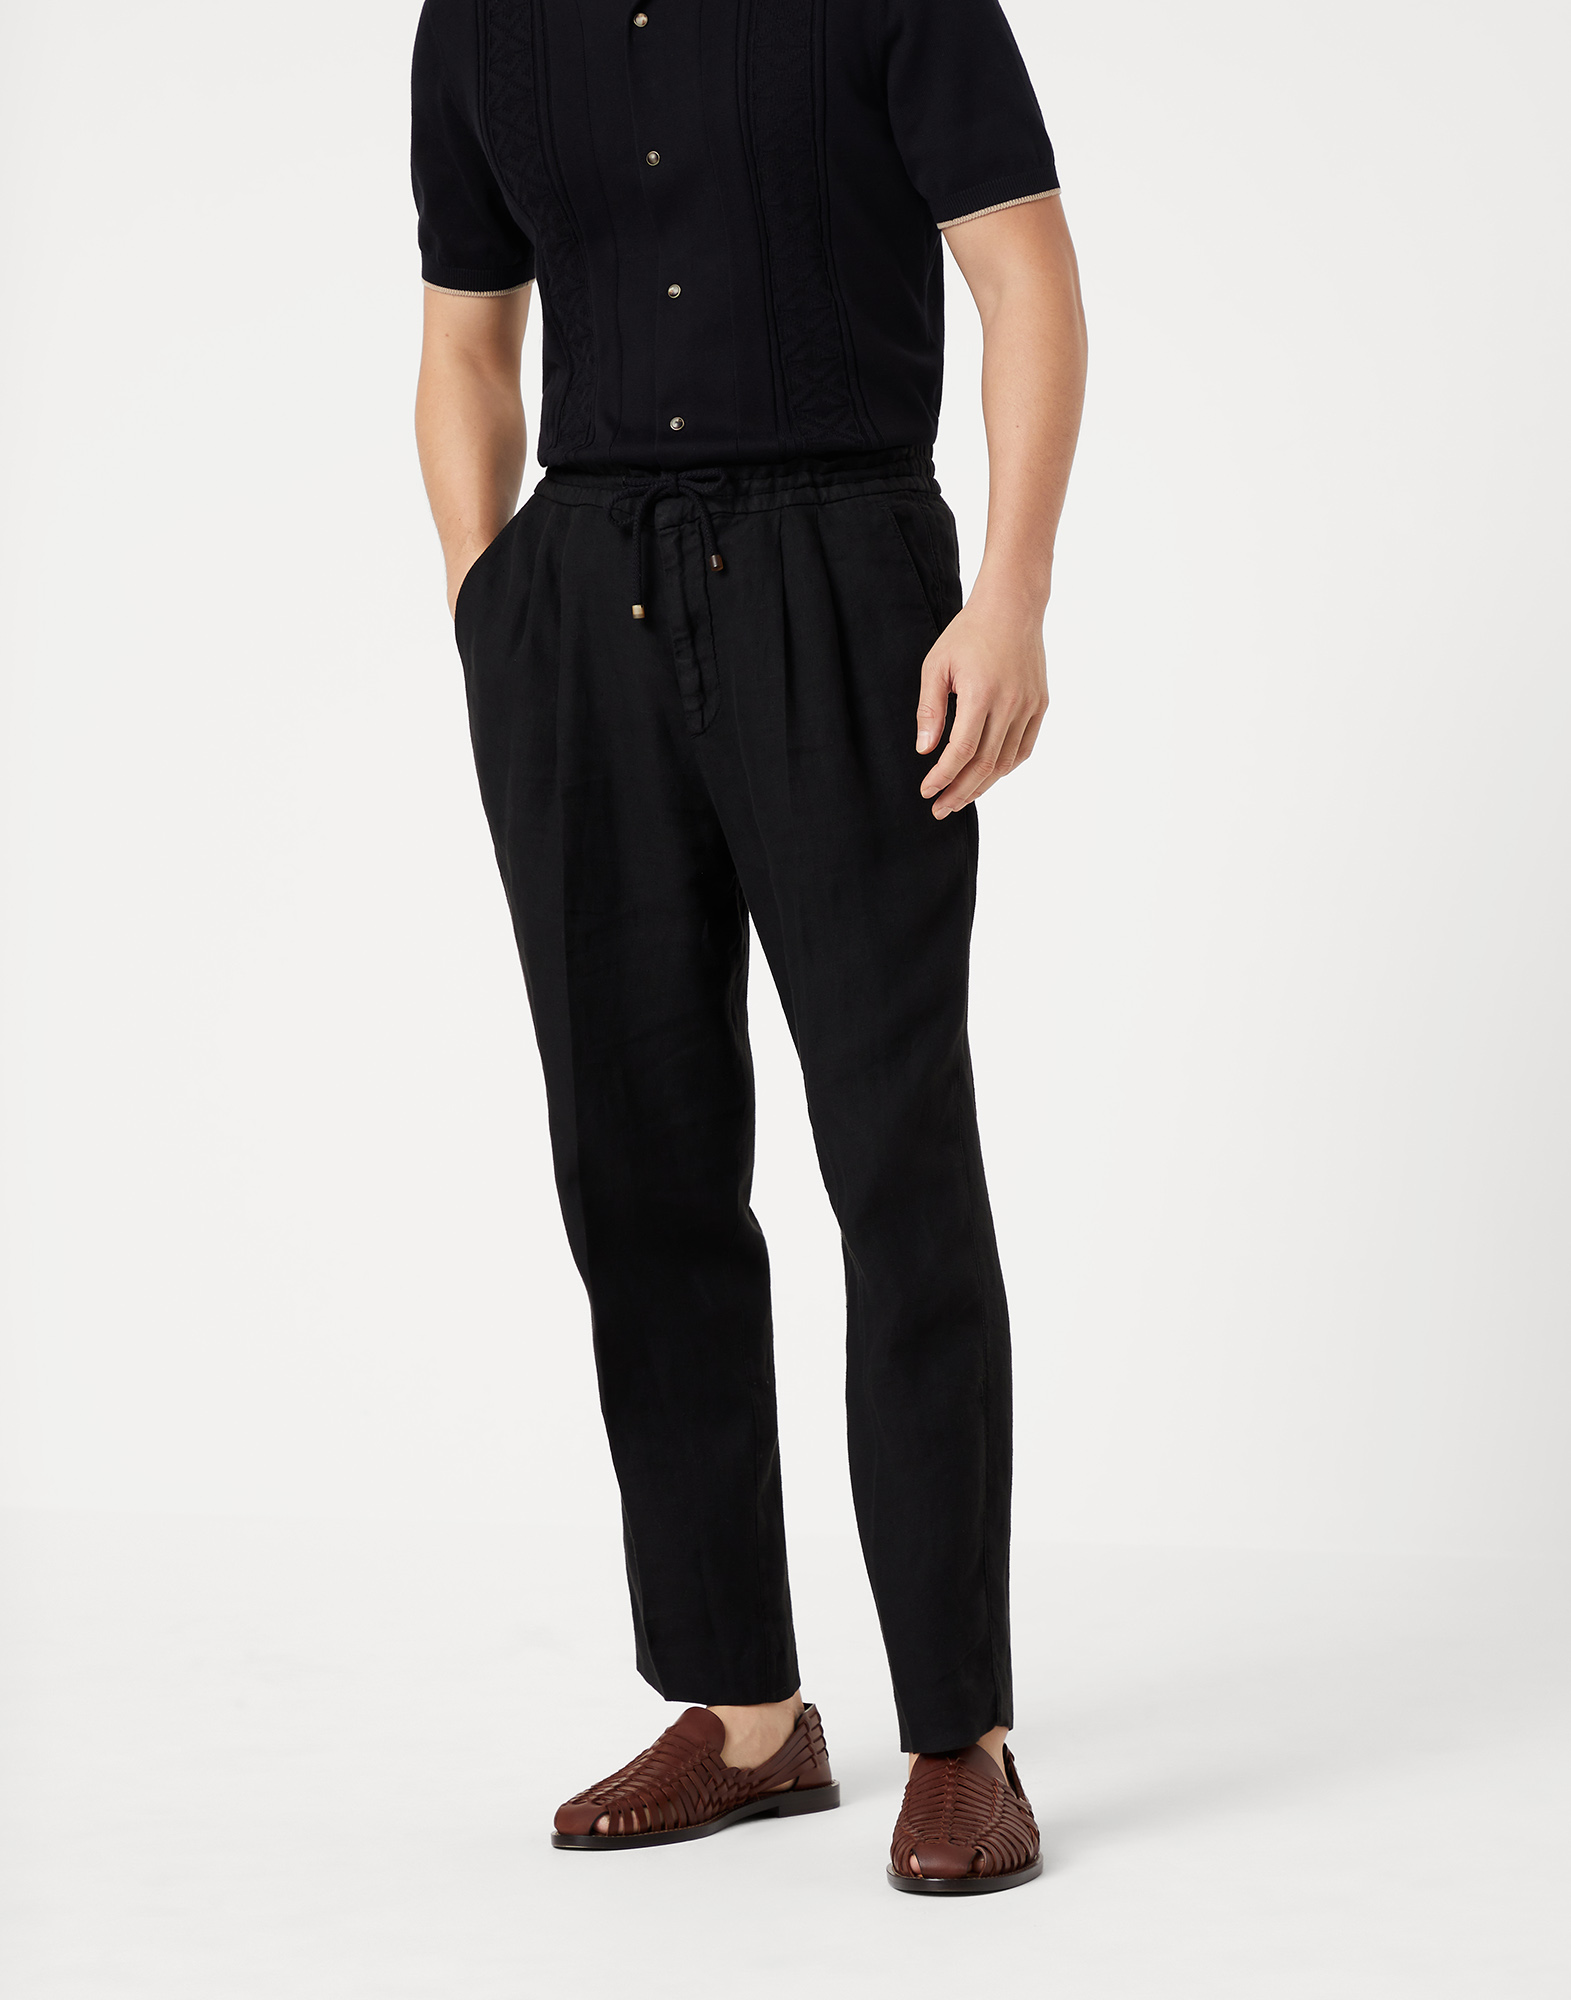 Leisure fit trousers with drawstring